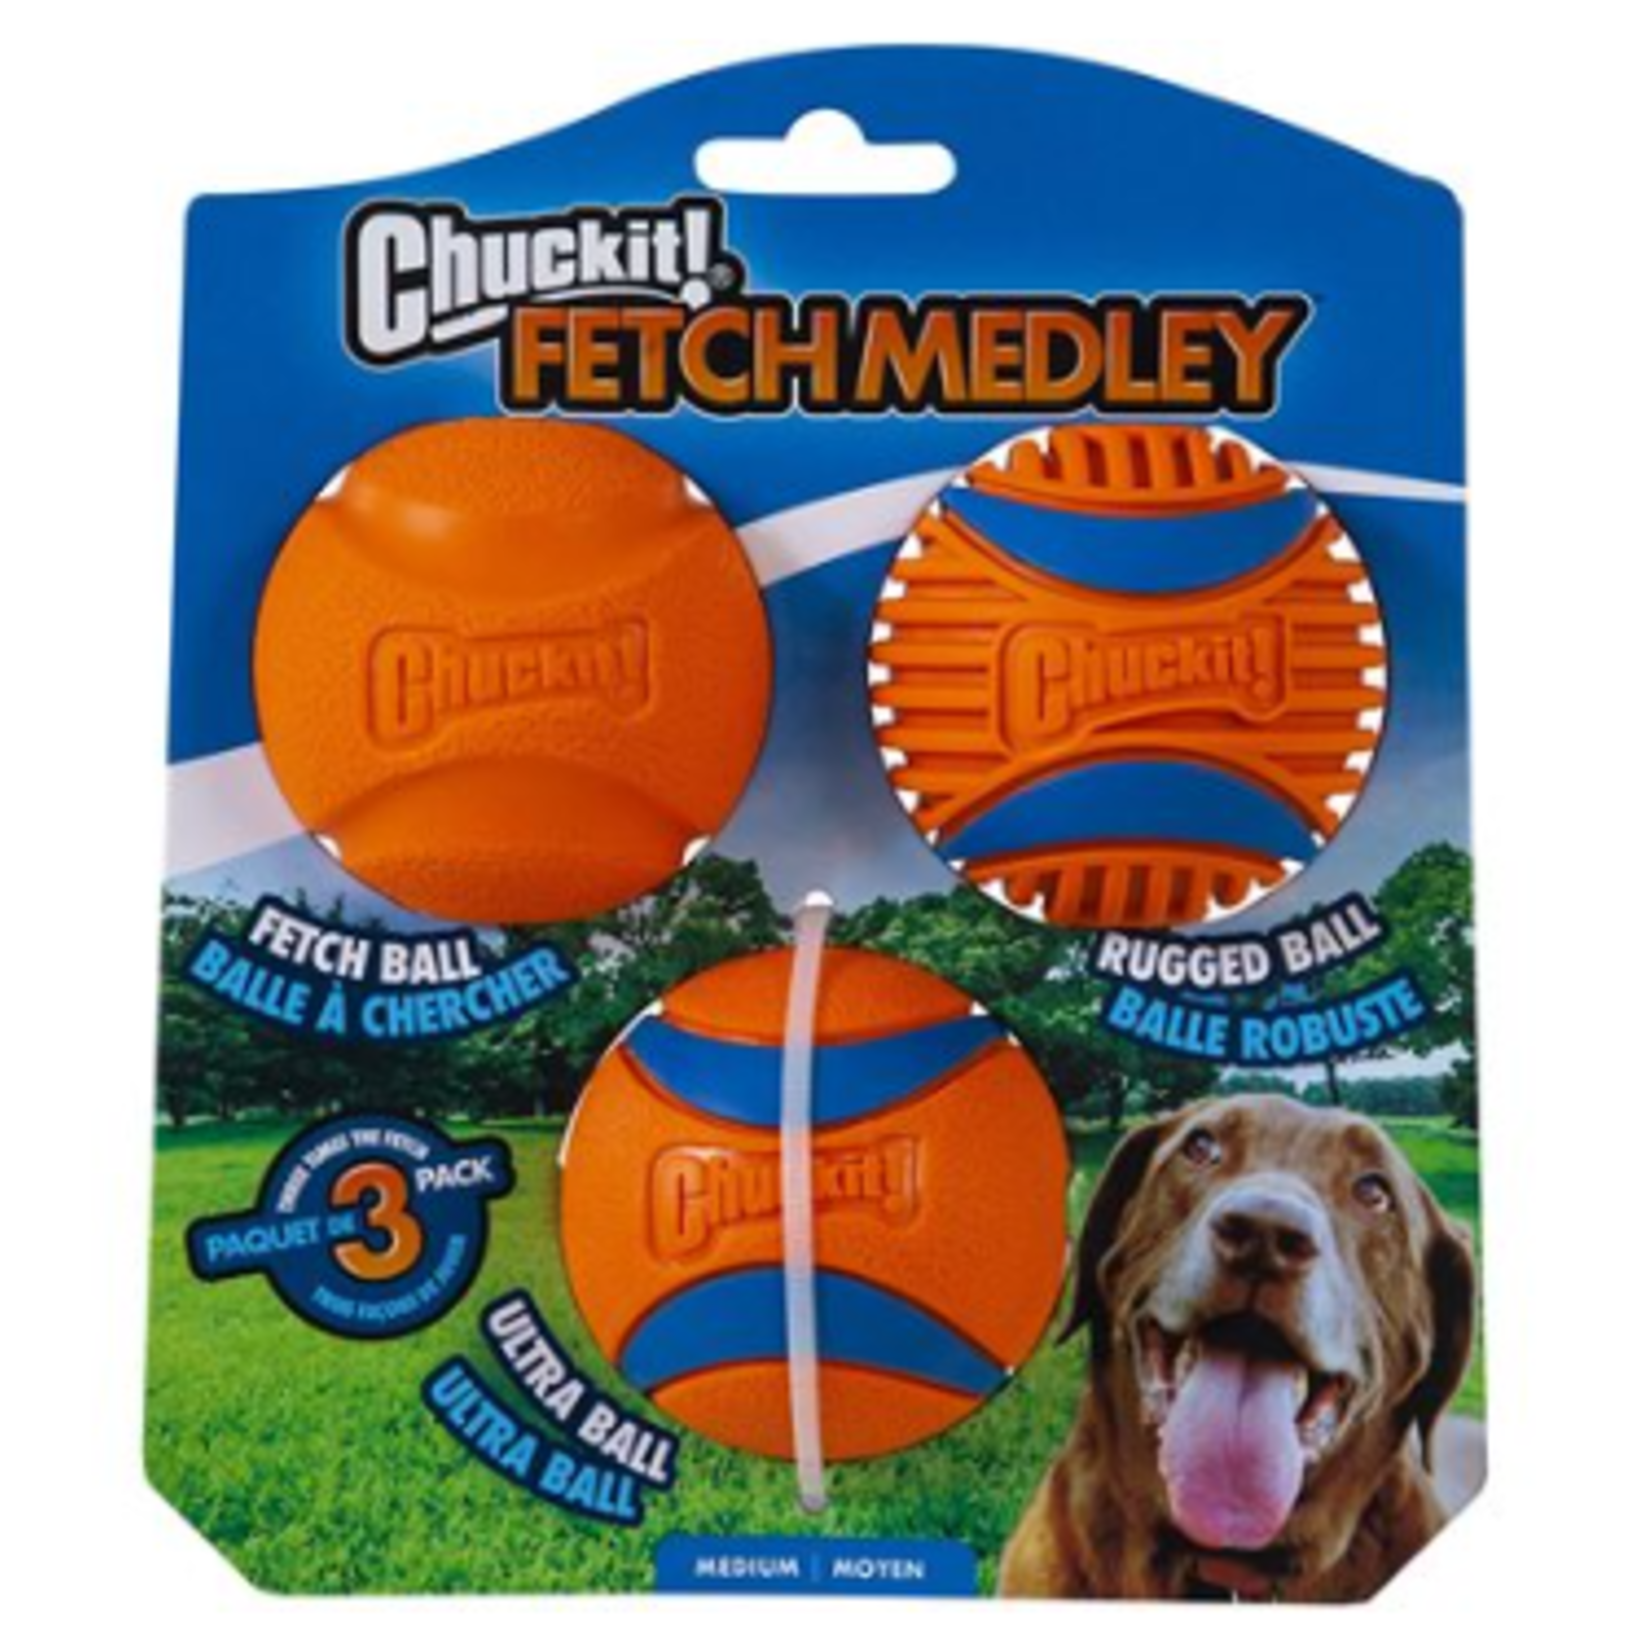 Chuck It! Fetch Medley 3rd Generation - Pack of 3